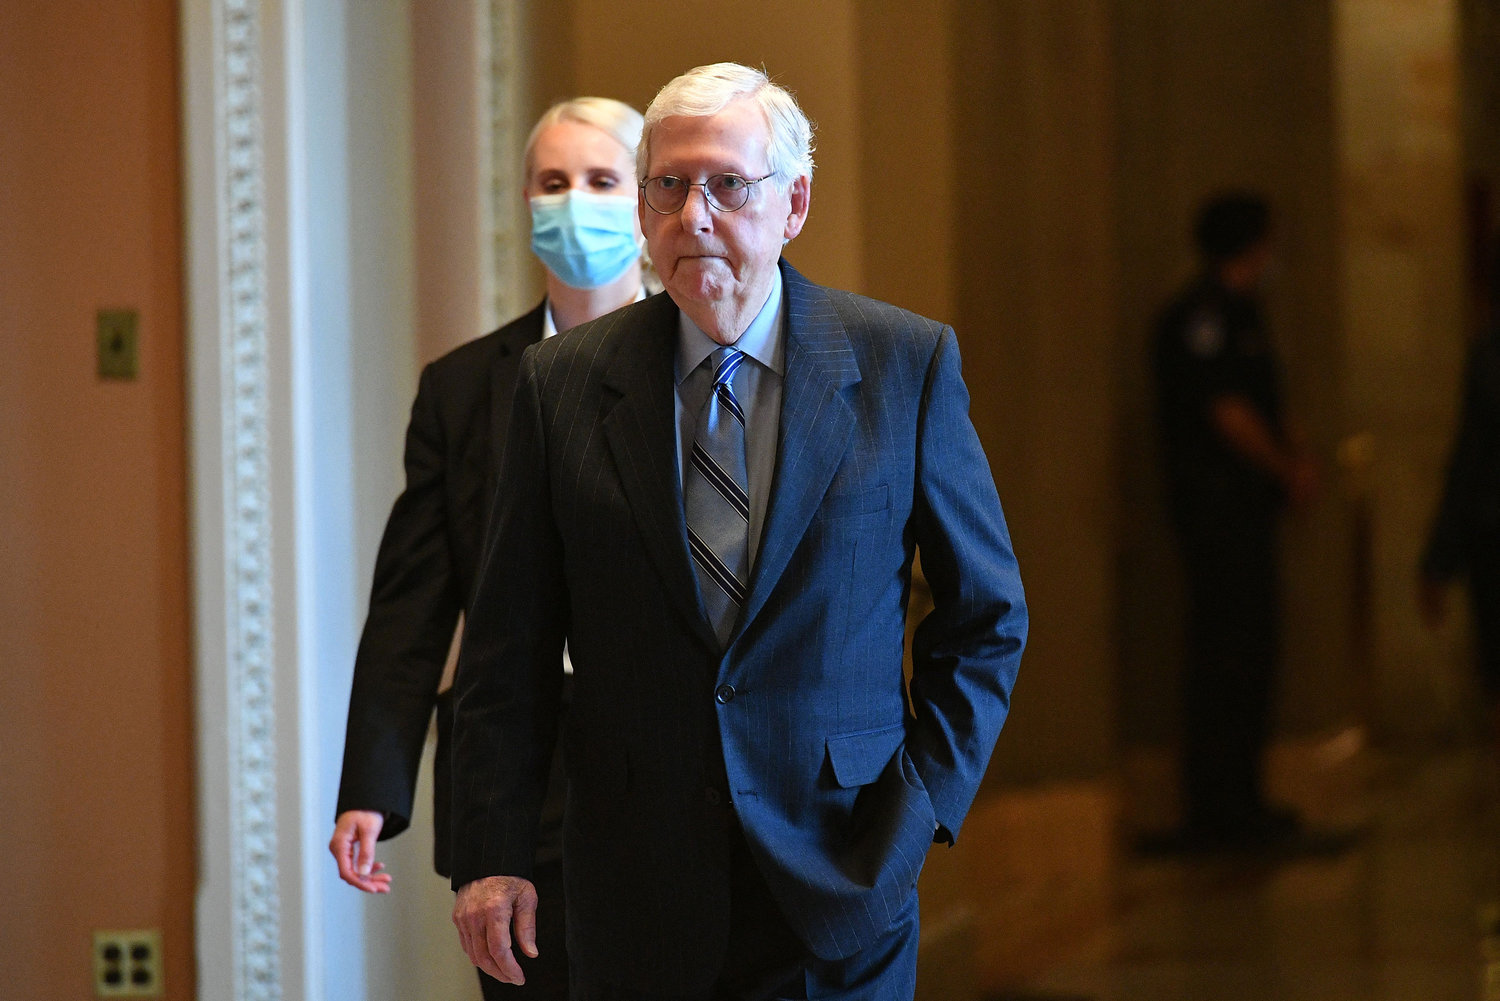 Senate Minority Leader Mitch McConnell, right, heads to chamber to cast his vote at the U.S. Capitol before a Senate vote on the passage of a massive infrastructure plan in Washington, D.C., on Tuesday, Aug. 10, 2021. (Mandel Ngan/AFP/Getty Images/TNS)